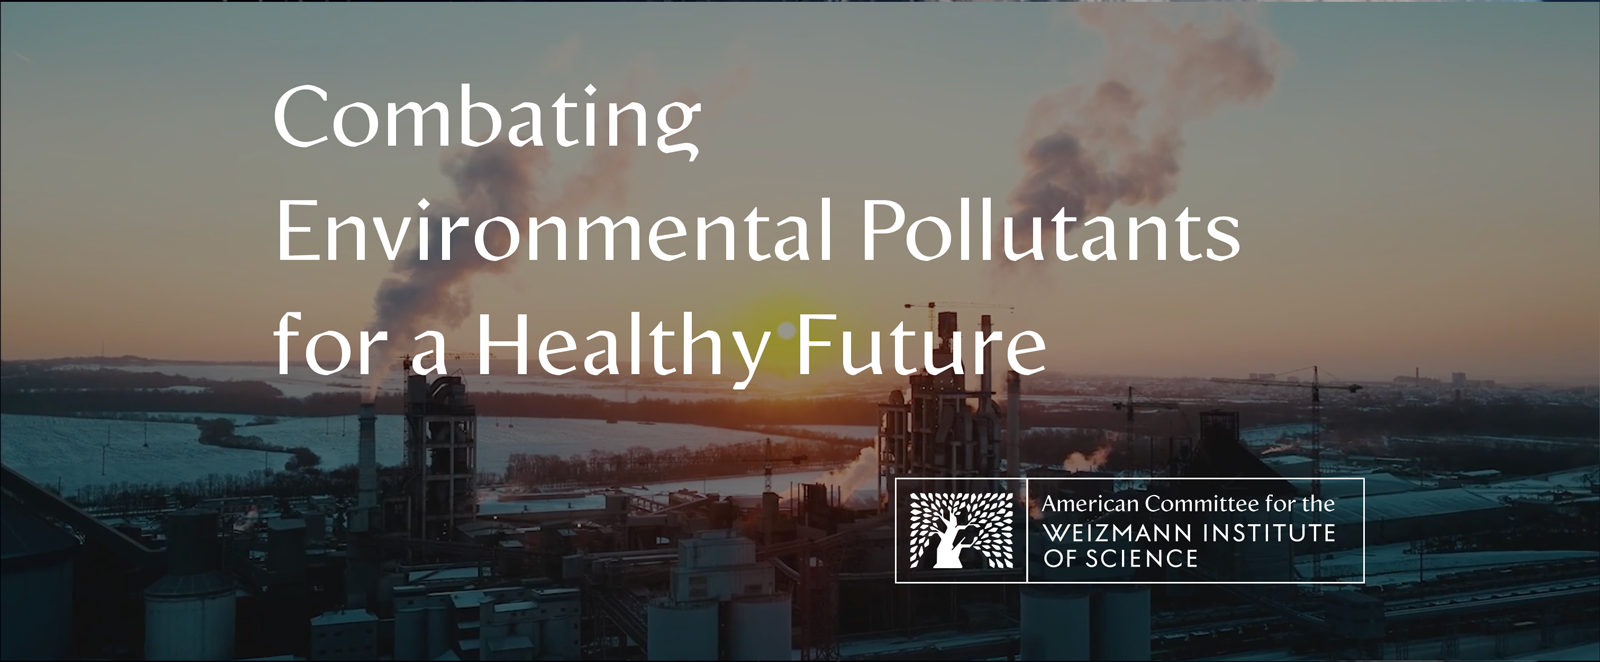 Combating Environmental Pollutants for a Healthy Future